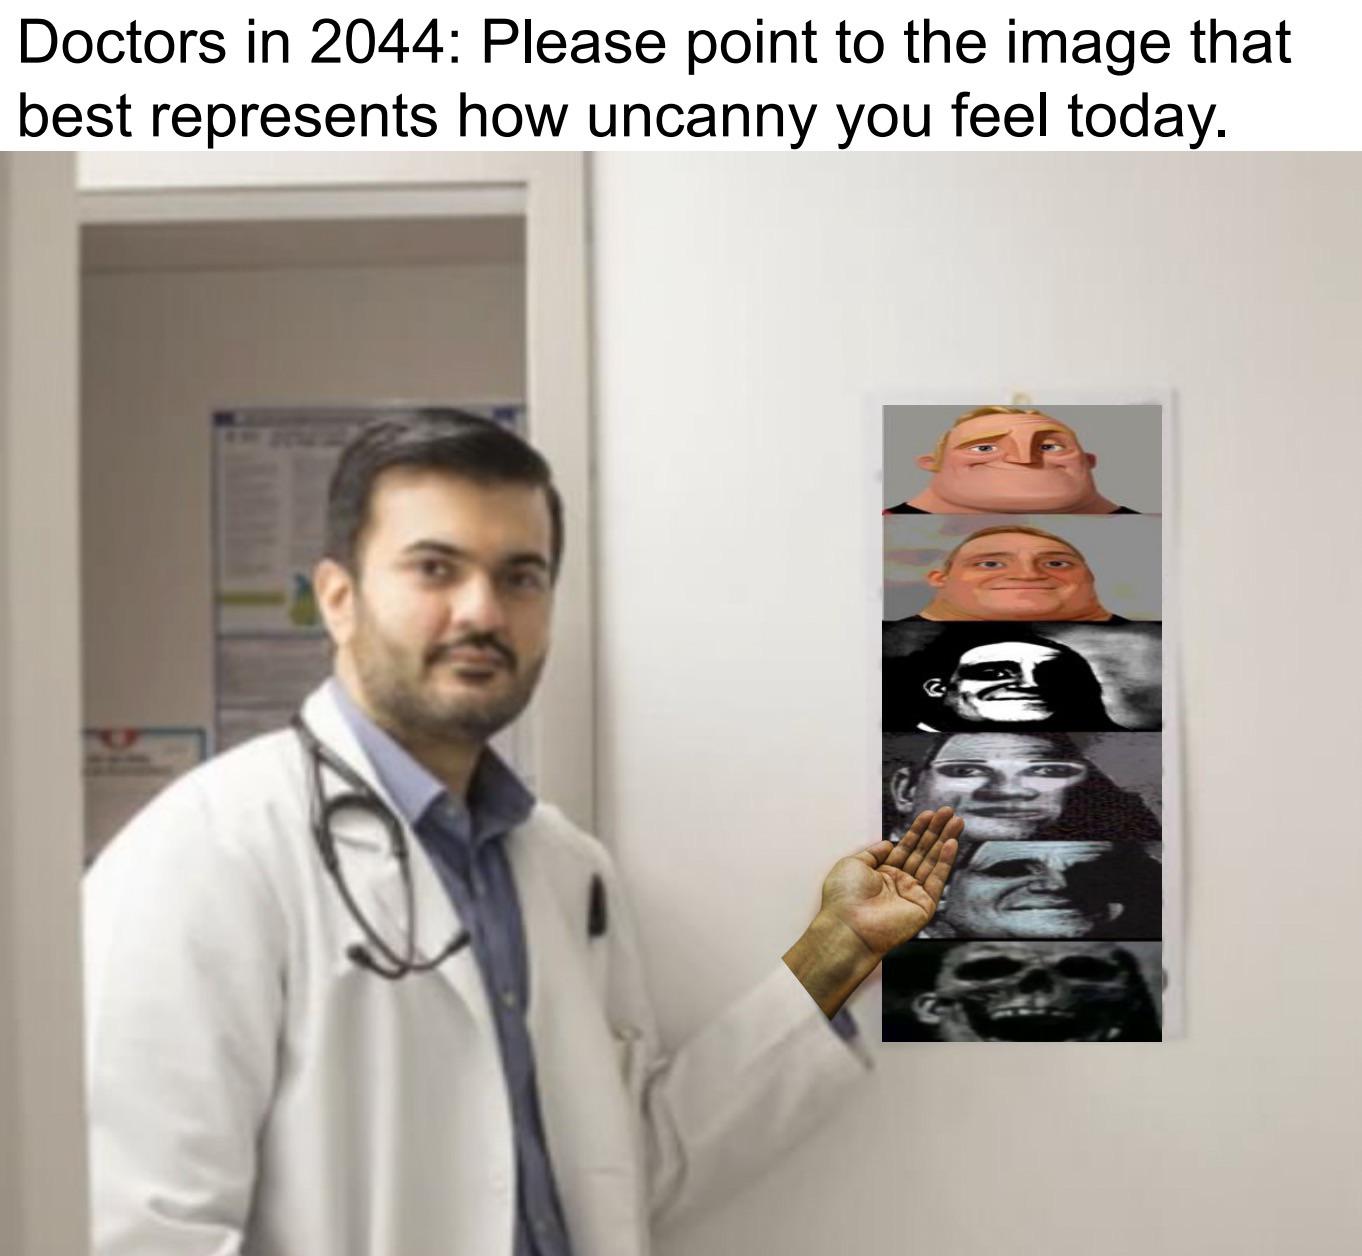 dank memes - funny memes - Doctors in 2044 Please point to the image that best represents how uncanny you feel today.